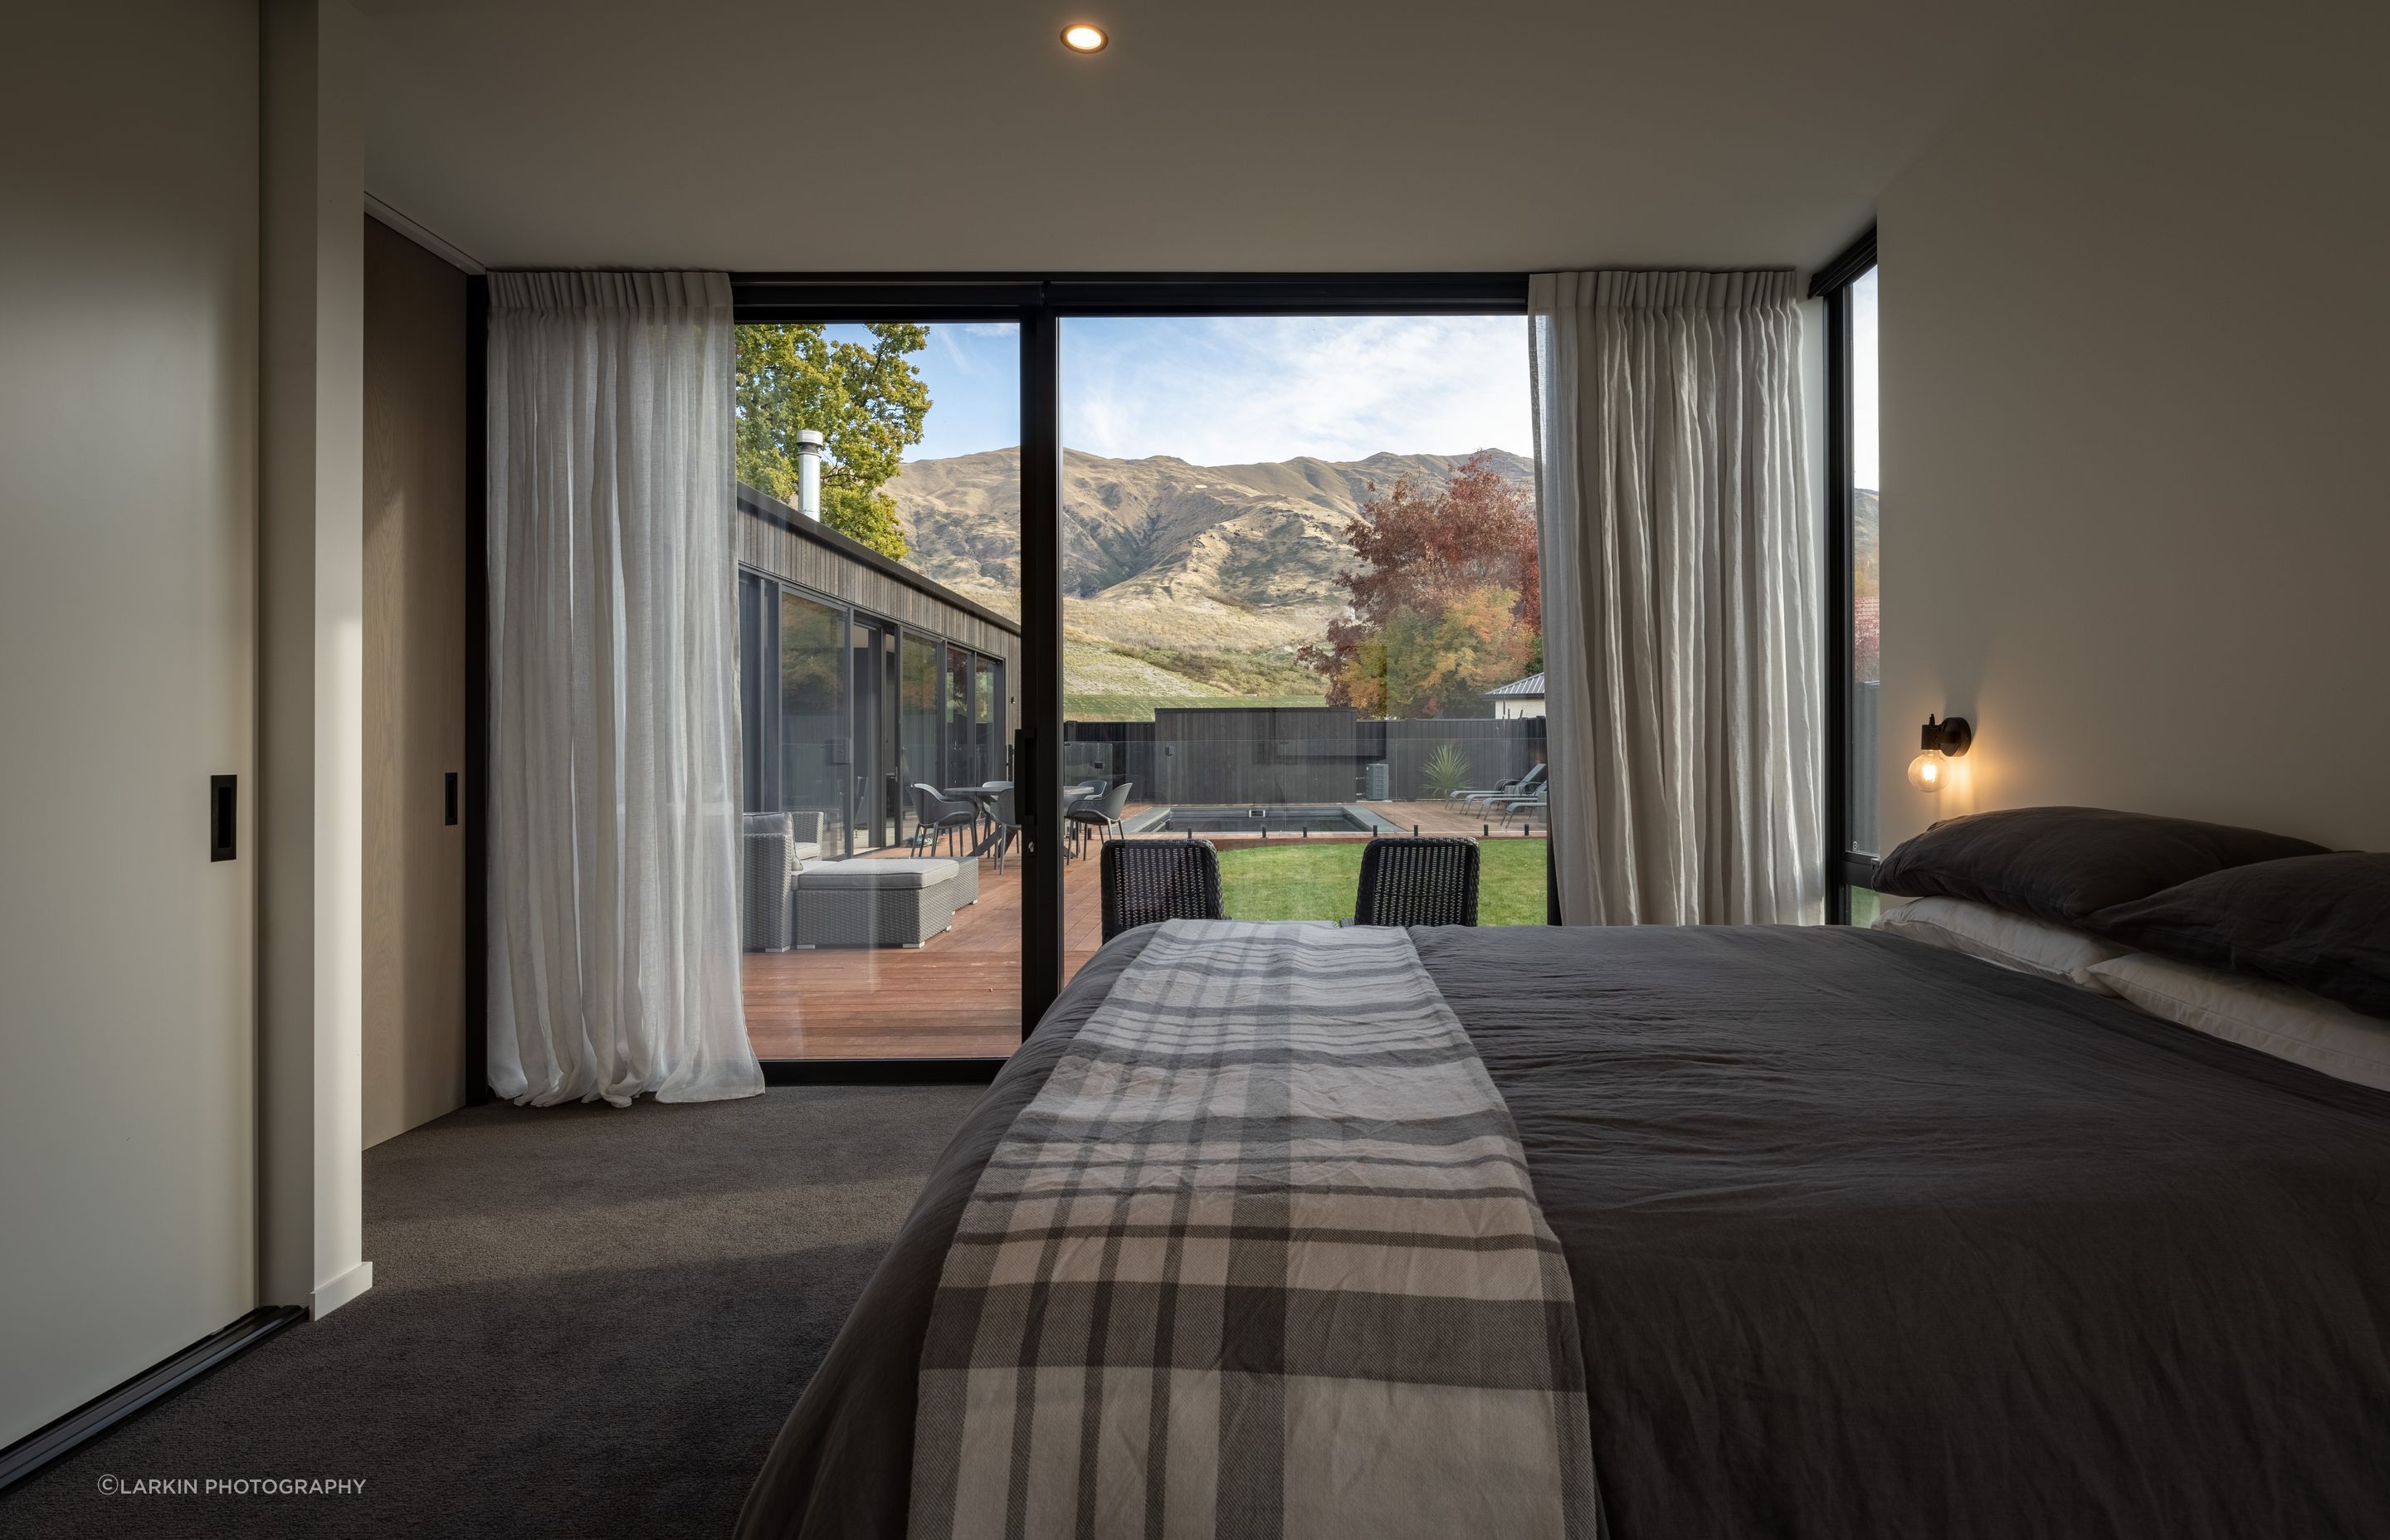 All the bedrooms are cleverly oriented to make the most of the mountain views while maintaining privacy.